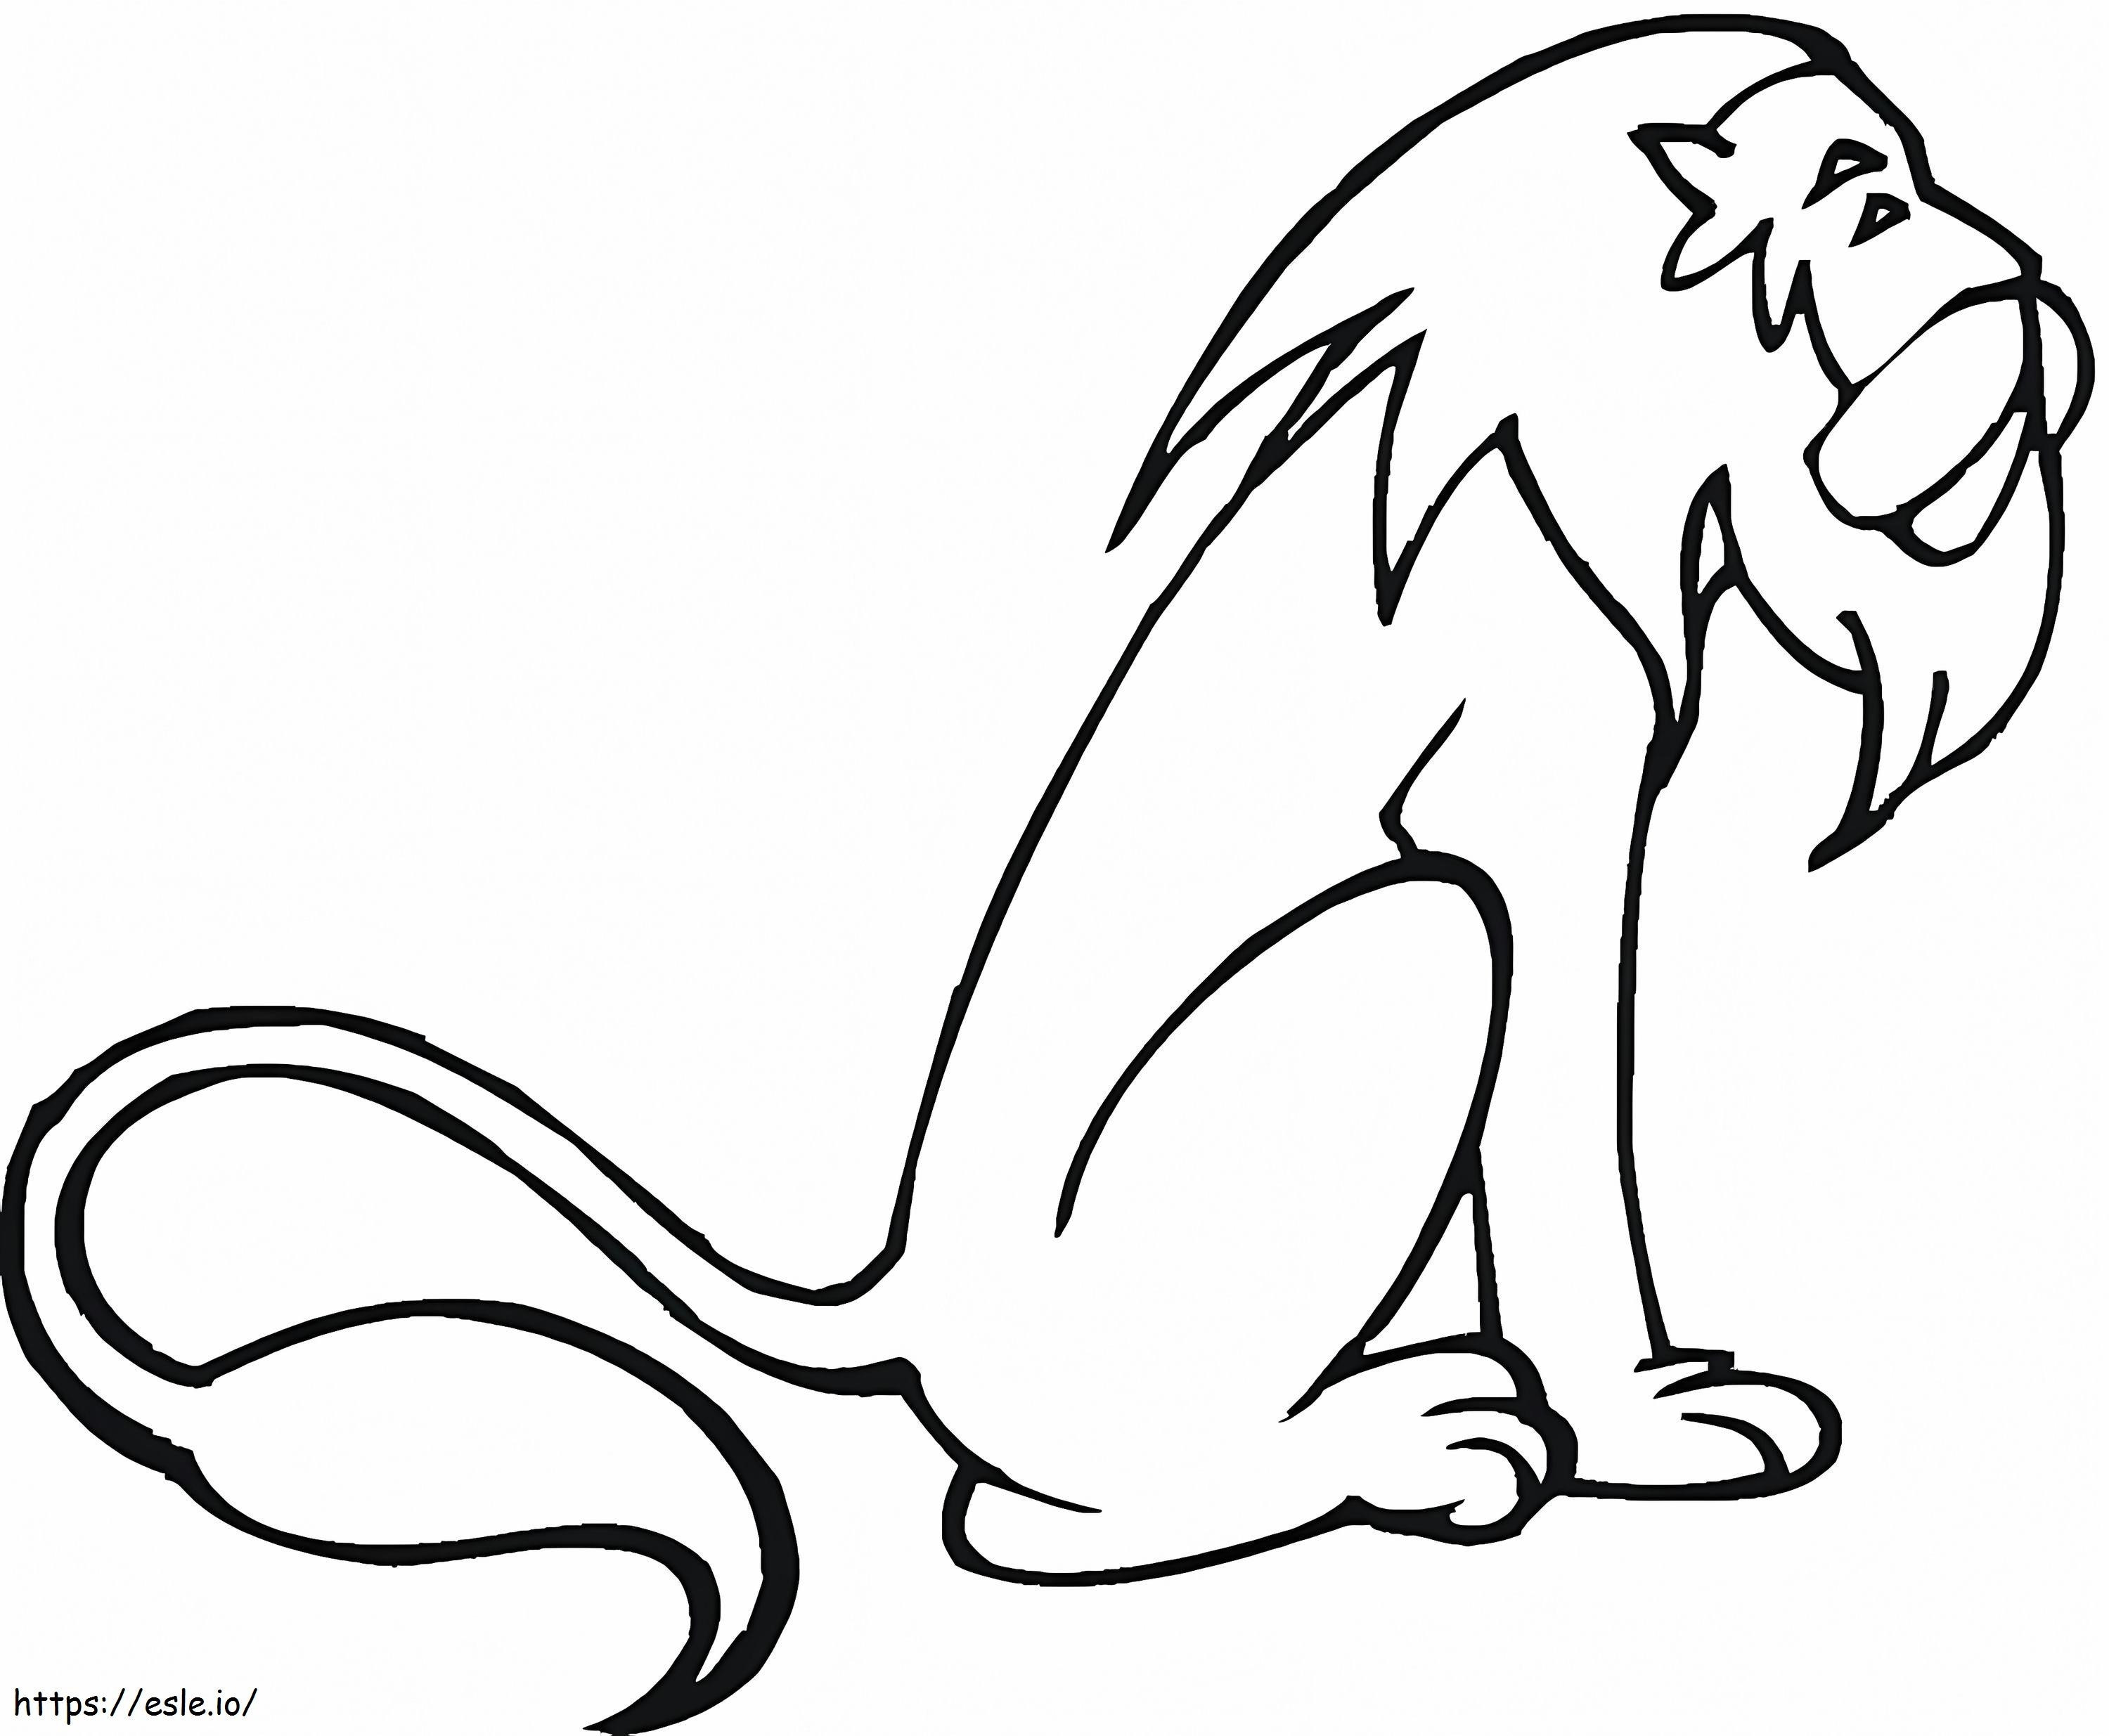 Old Lion coloring page